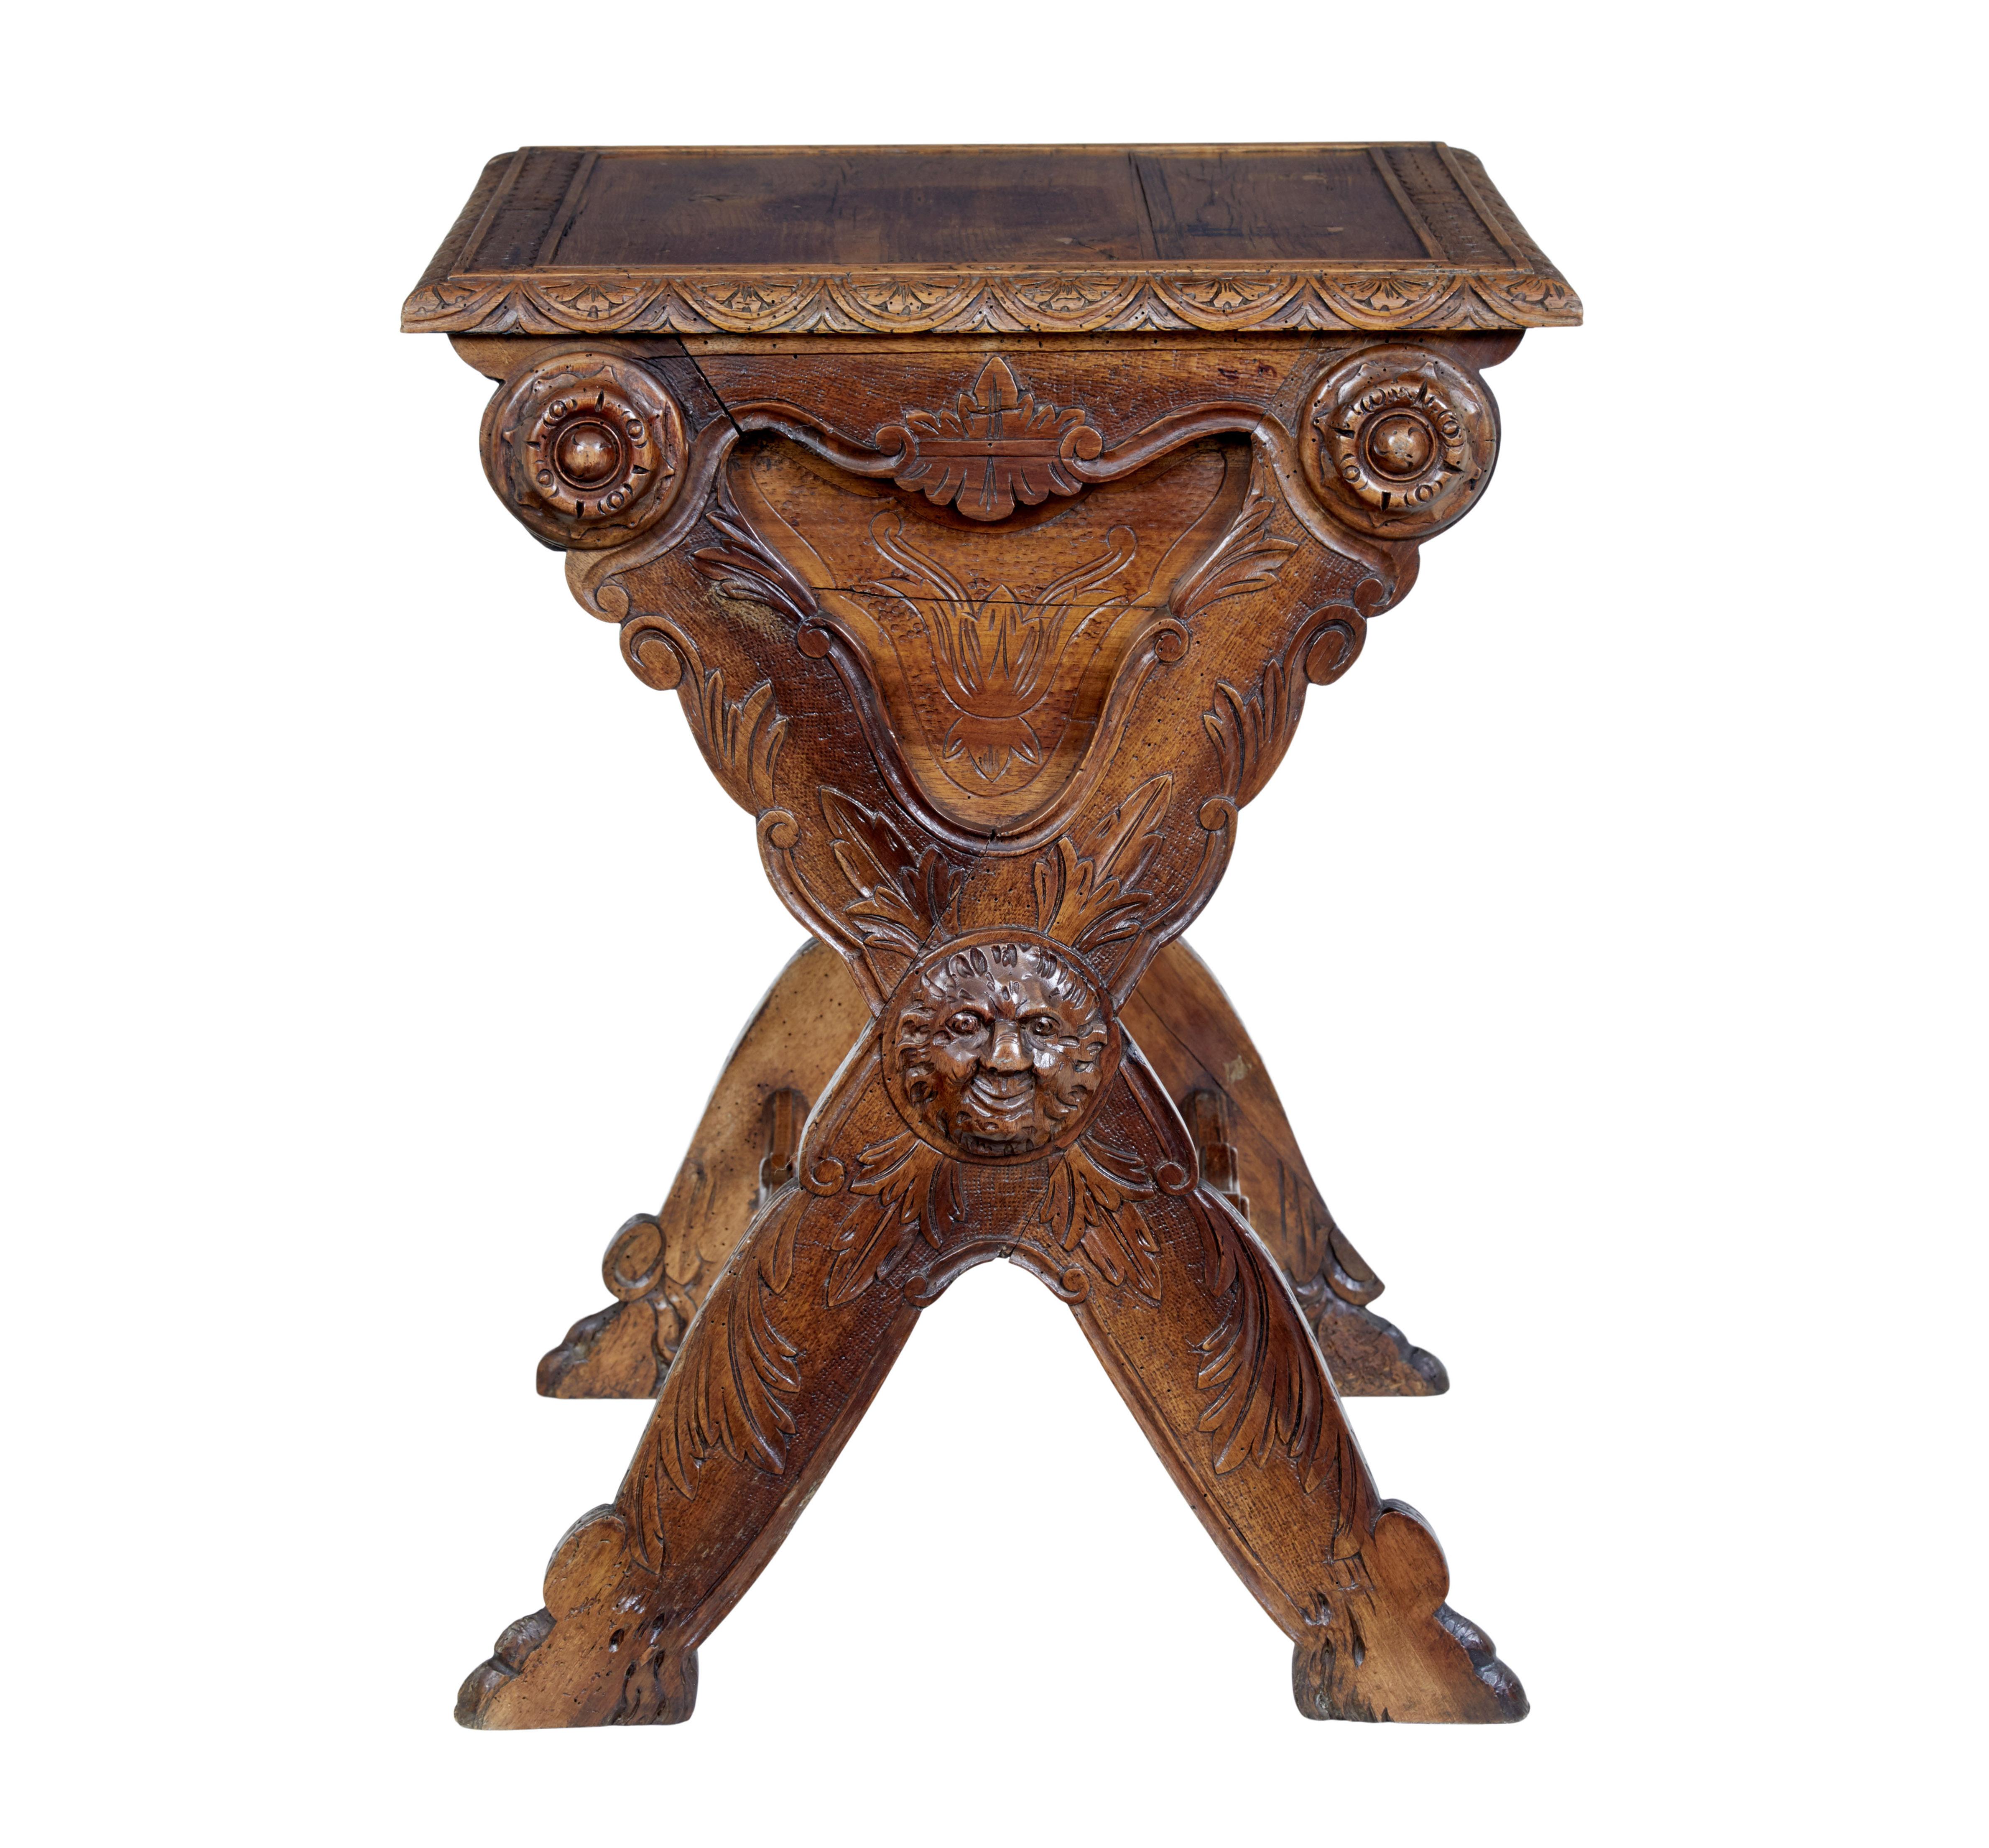 Gothic Revival 19th Century Carved Italian Walnut and Pine Occasional Table